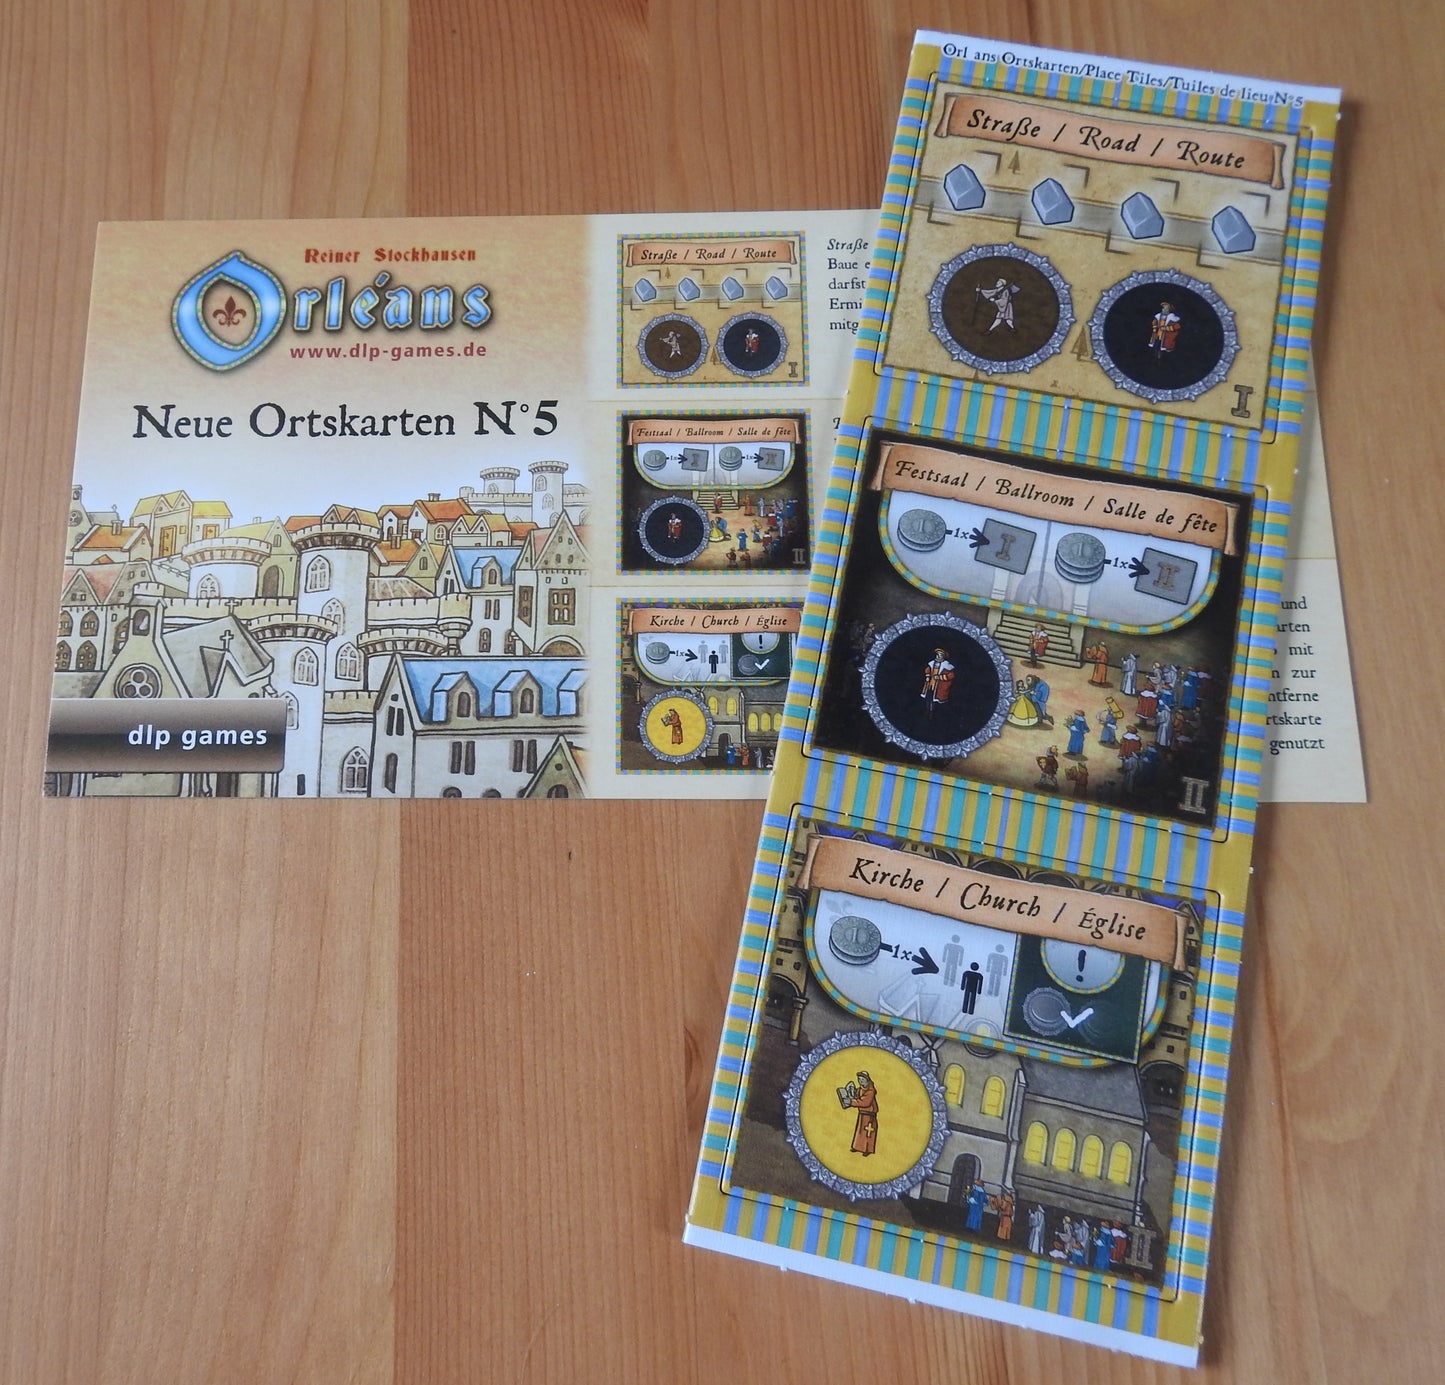 Top view of the 3 new place tiles and rules included with this Orleans - New Place Tiles No.5 mini expansion.